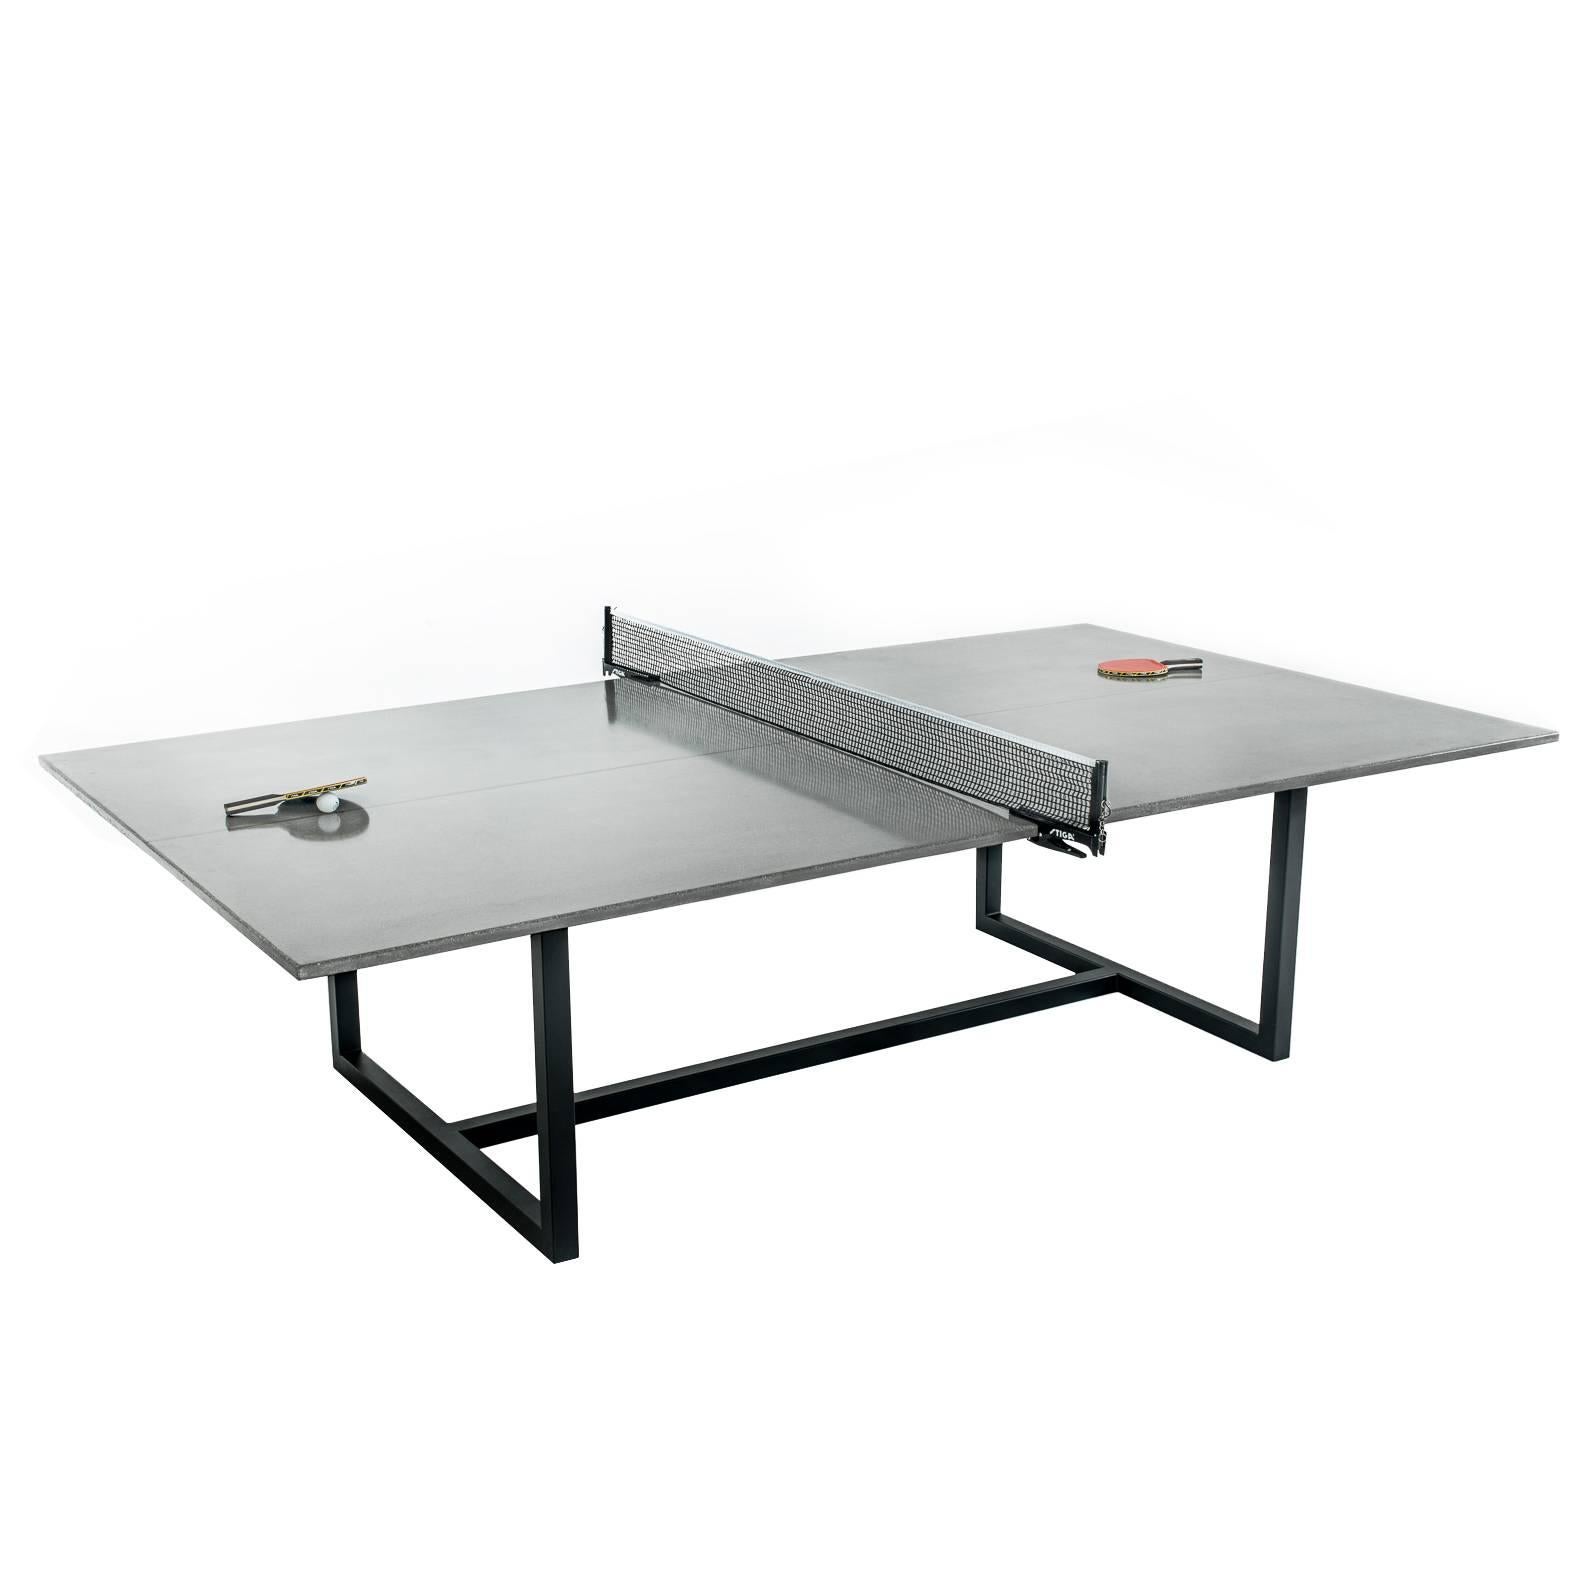 James de Wulf Vue Concrete Ping Pong Table, Powder Coated Steel Base - Standard For Sale